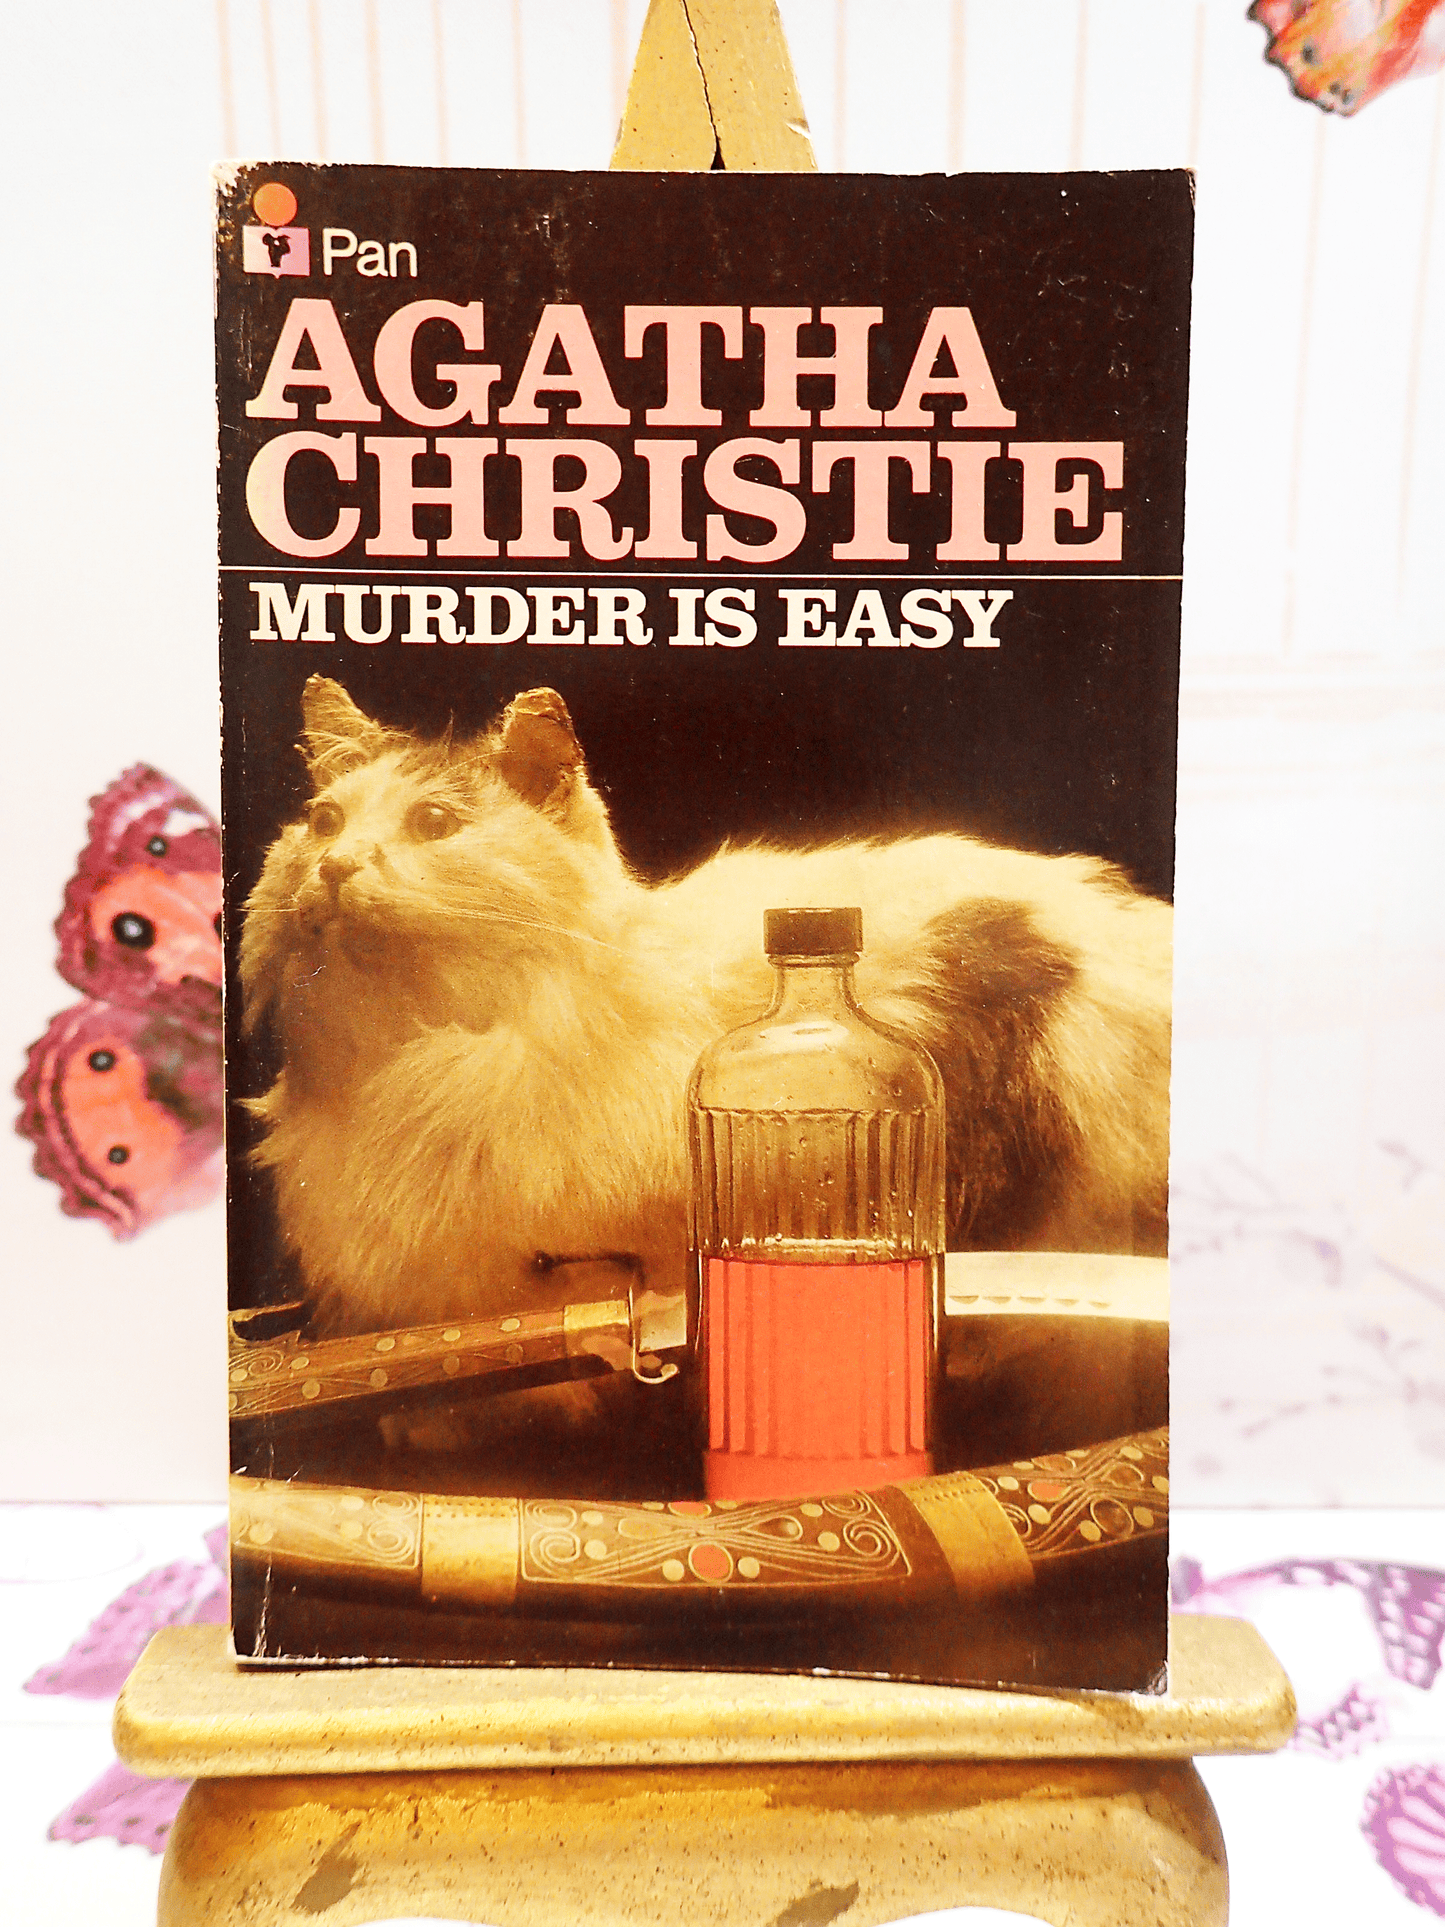 Agatha Christie Murder is Easy cover of Vintage Pan Paperback showing a cat with a poison bottle. Classic Crime book.